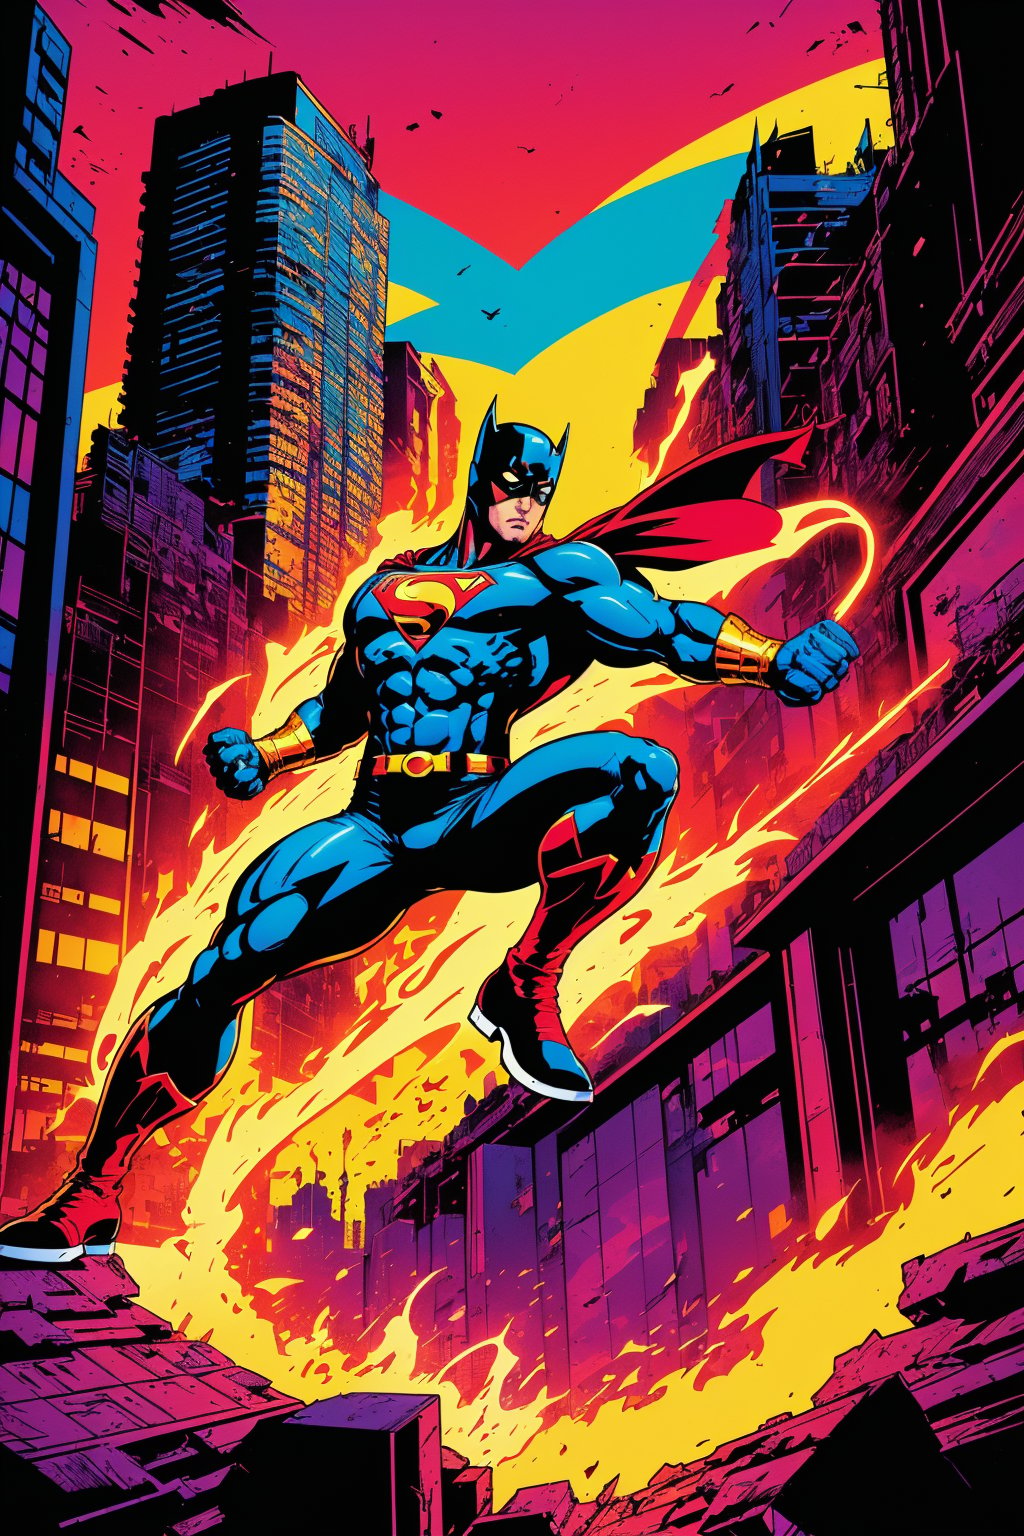 (ultra-detailed, vivid colors, highres:1.2), vector illustration, superhero, muscular hero, flying cape, powerful stance, dynamic pose, intense action, energy blasts, epic battle, city skyline, dramatic lighting, comic book style, bold lines, vibrant colors, dramatic shadows, intense expressions, iconic symbol.